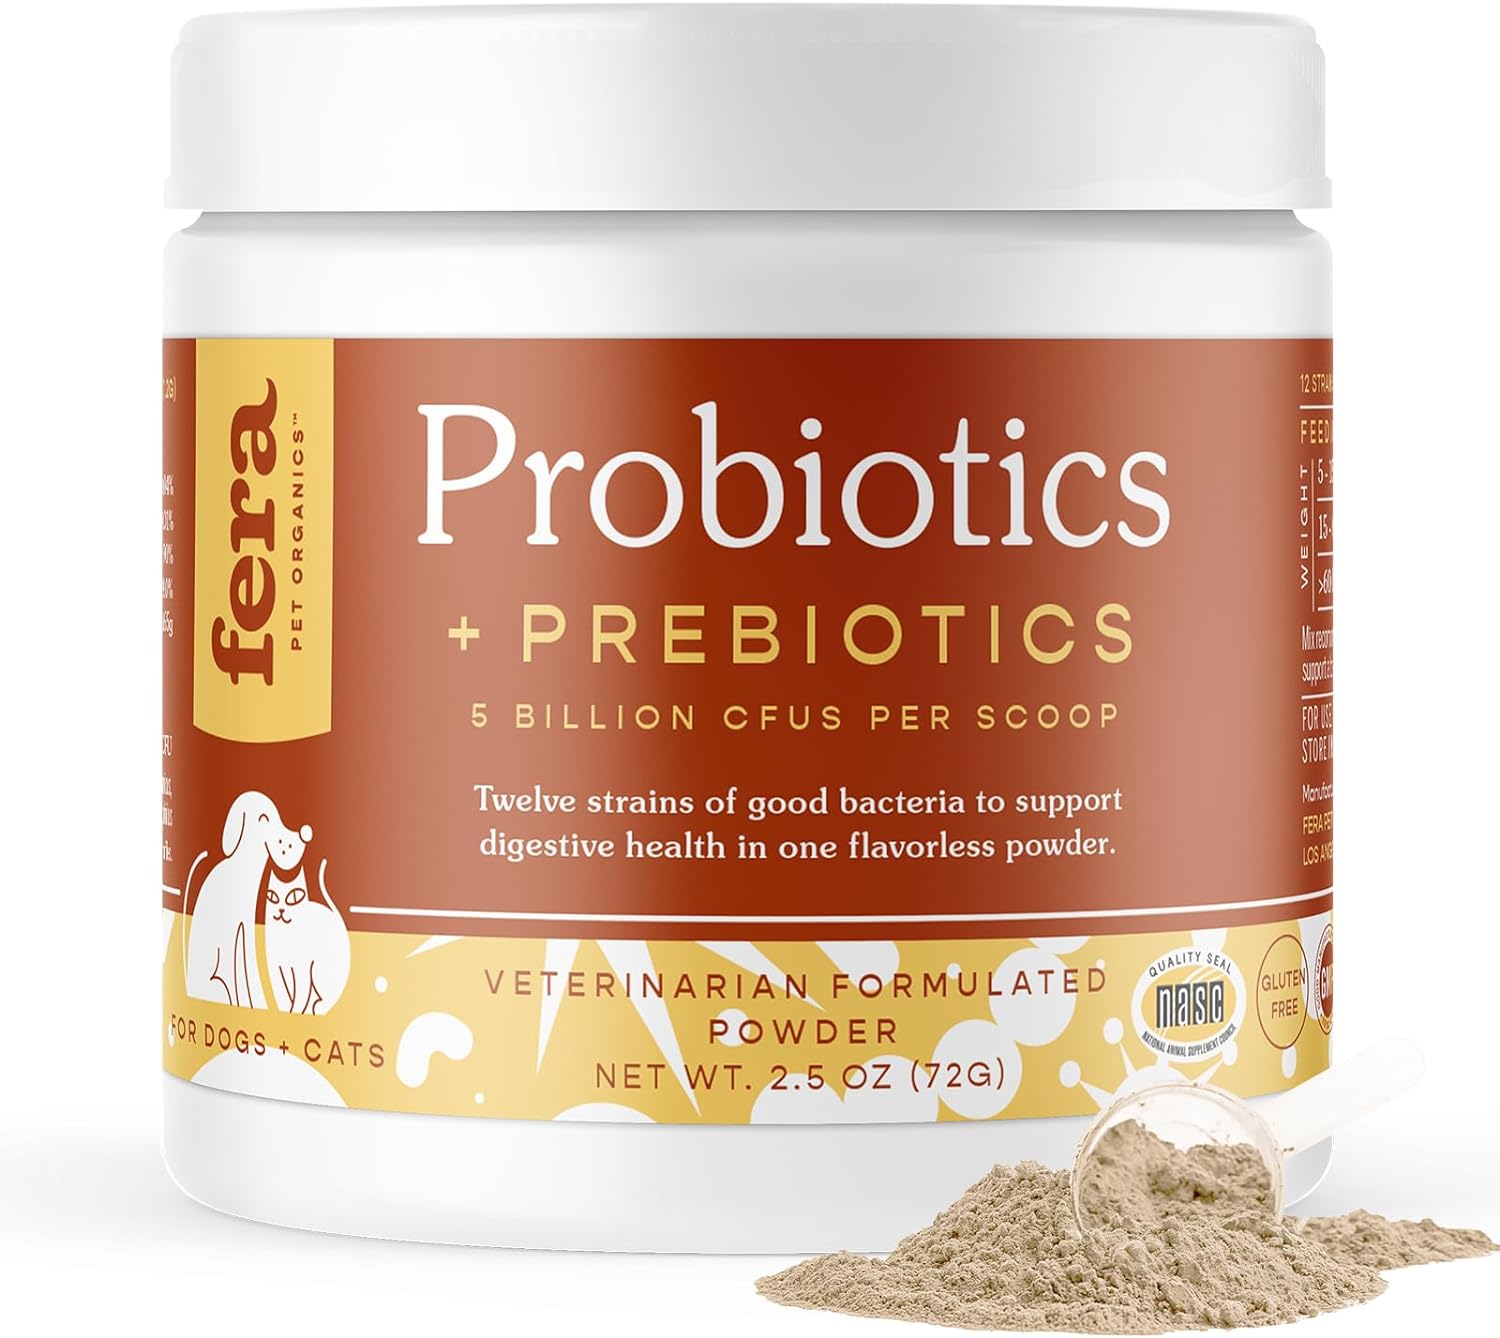 Fera Pets Organic Probiotics for Dogs & Cats - Cat & Dog Probiotic Supplement with 12 Strains & Prebiotics for Your Pet’s Digestion - 60 Scoops?